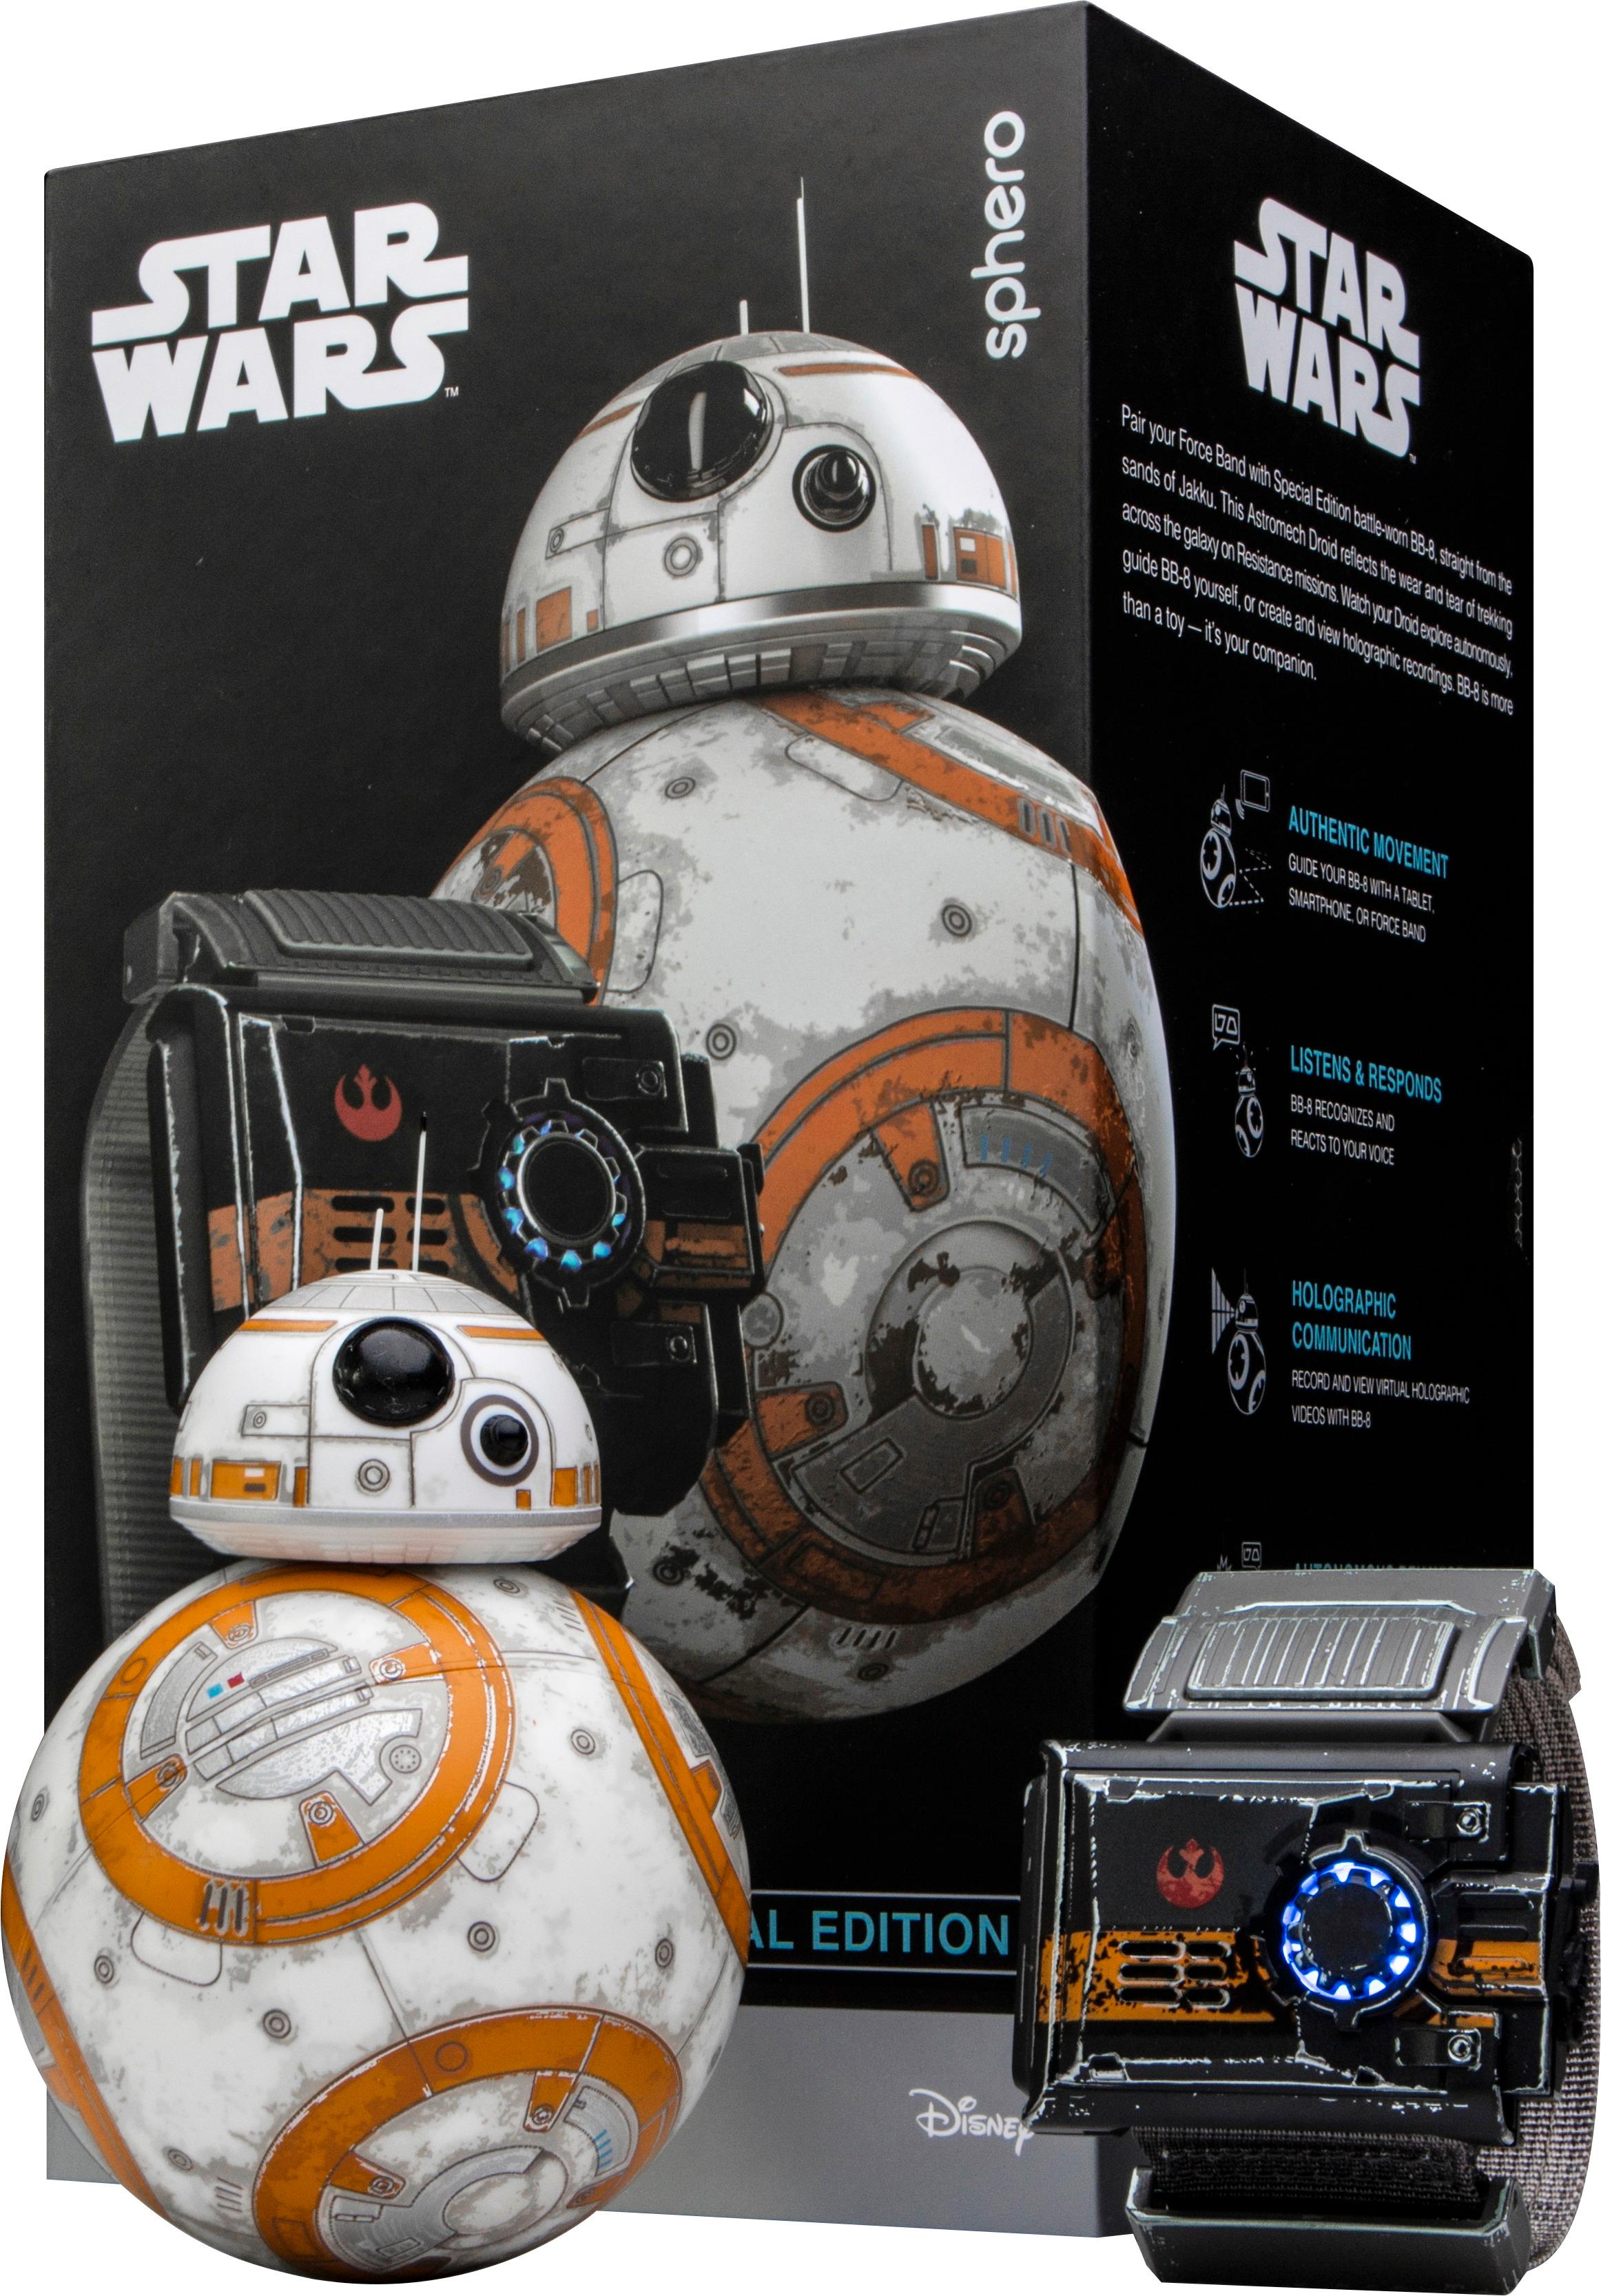 Rare Sphero Star Wars Shop Special Edition BB-8 Droid Force Band Promo Display 